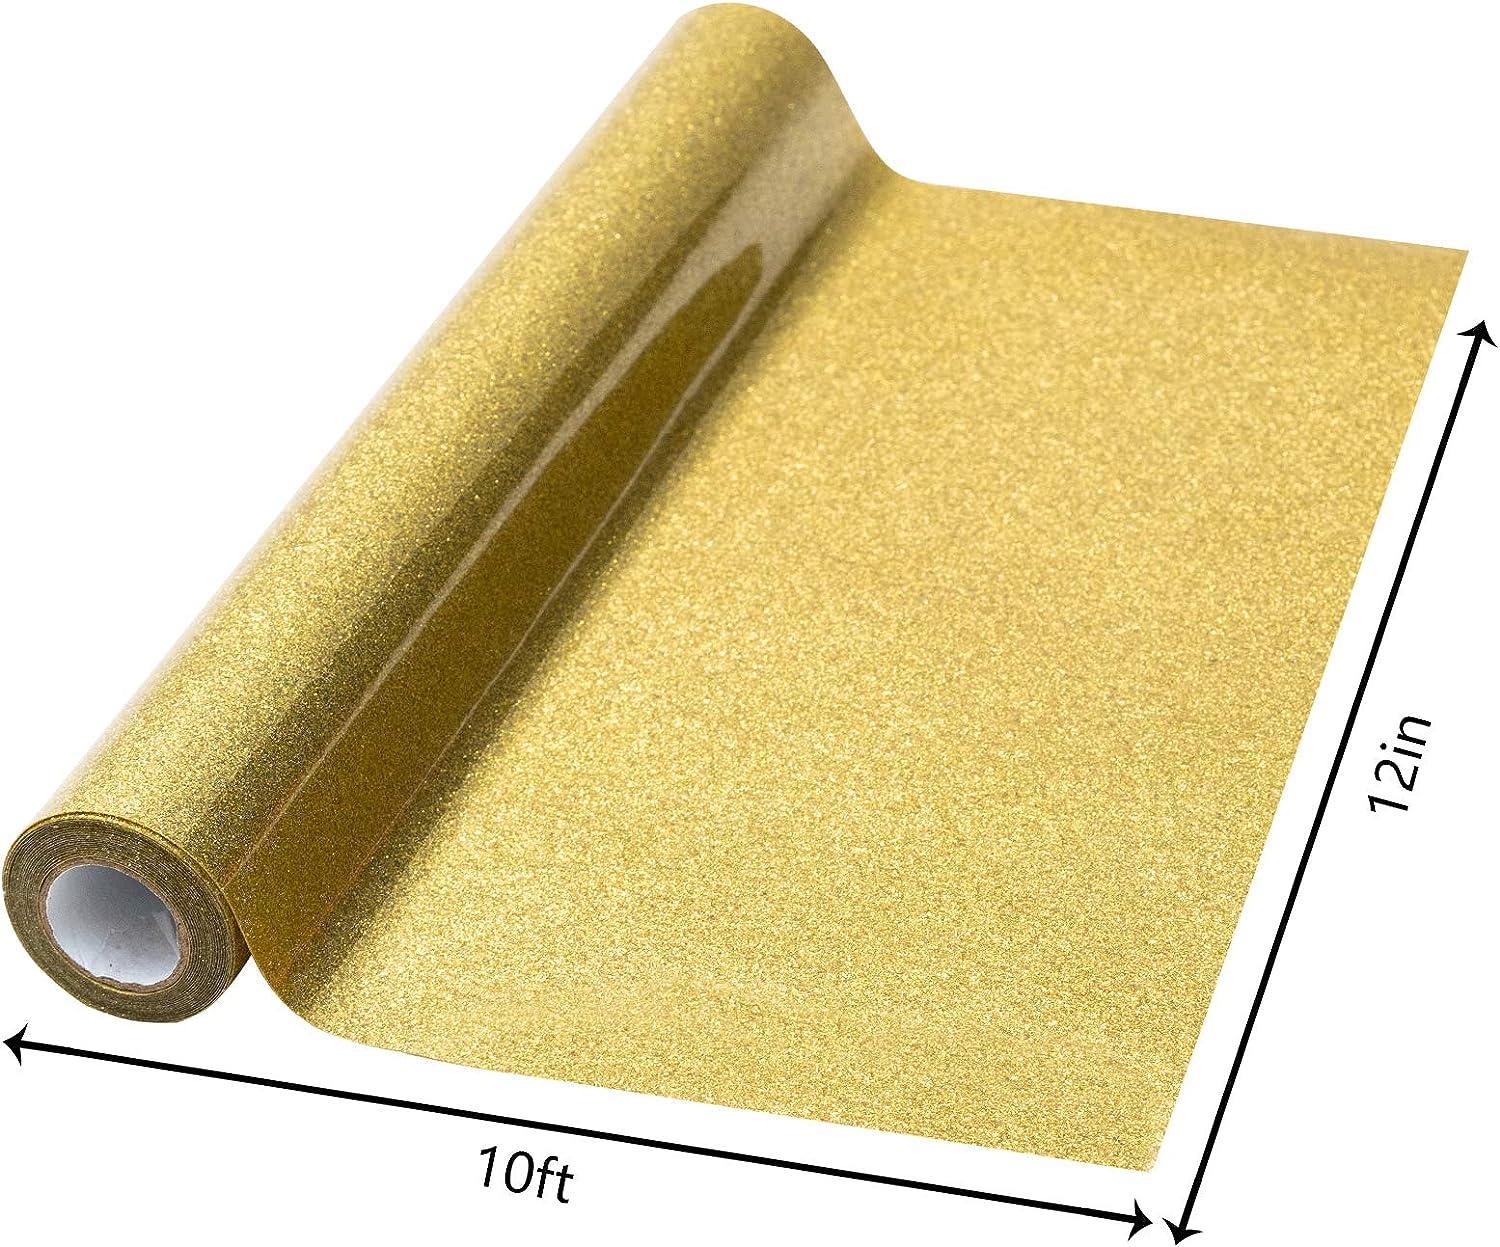 Gold Htv Vinyl Gold Iron Heat Transfer Vinyl Gold Rolls HTV Vinyl 12 Inch x  5 Feet Iron On Vinyl for T-Shirts Totes and Bags, Easy to Cut & Weed for